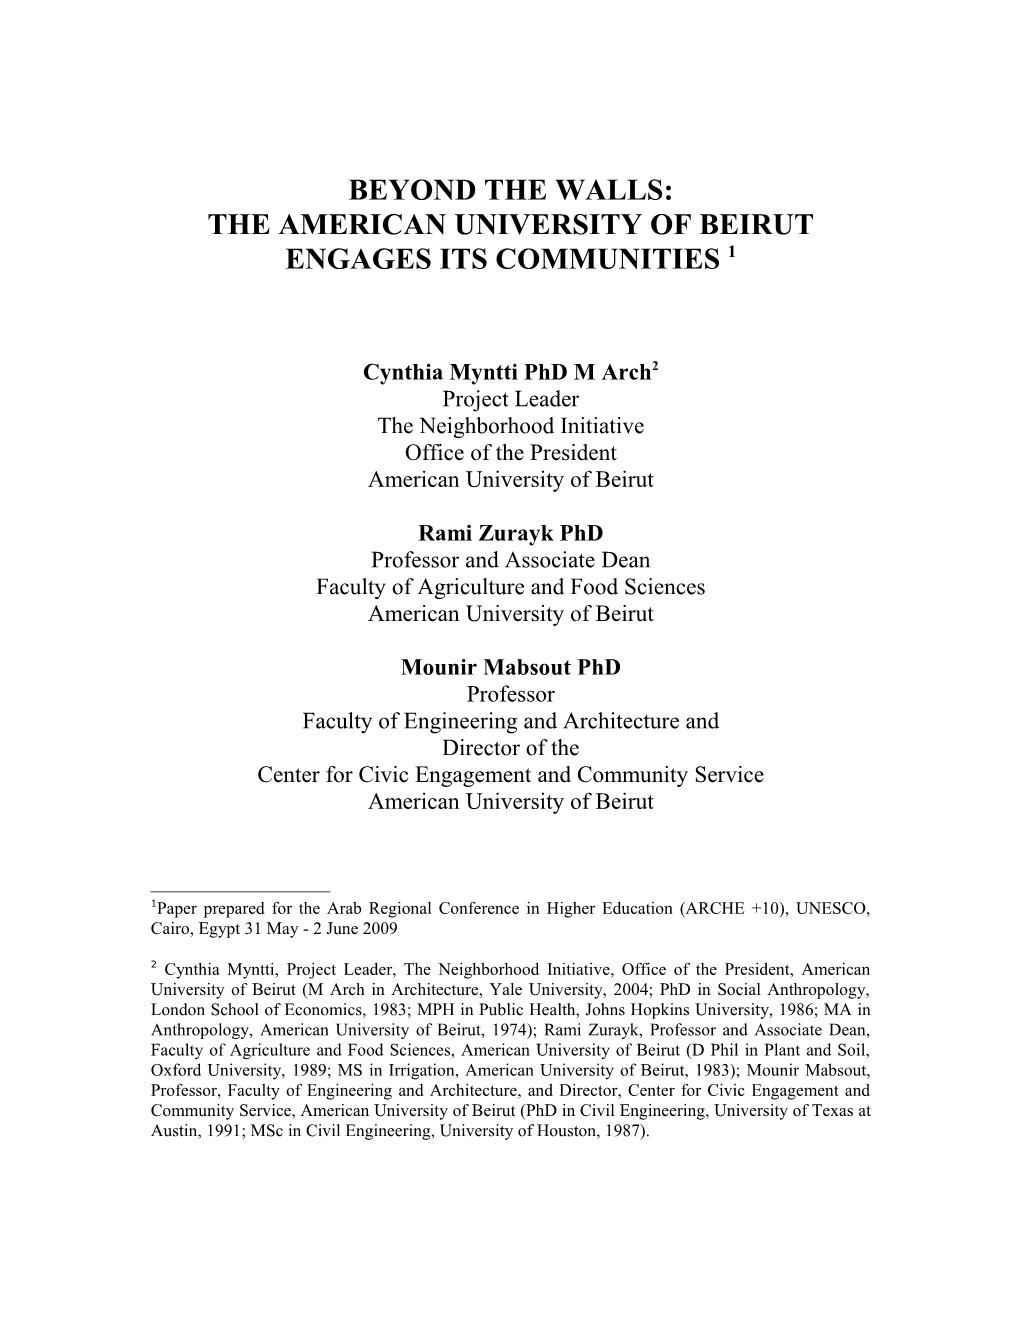 Beyond the Walls: the American University of Beirut Engages Its Communities 1